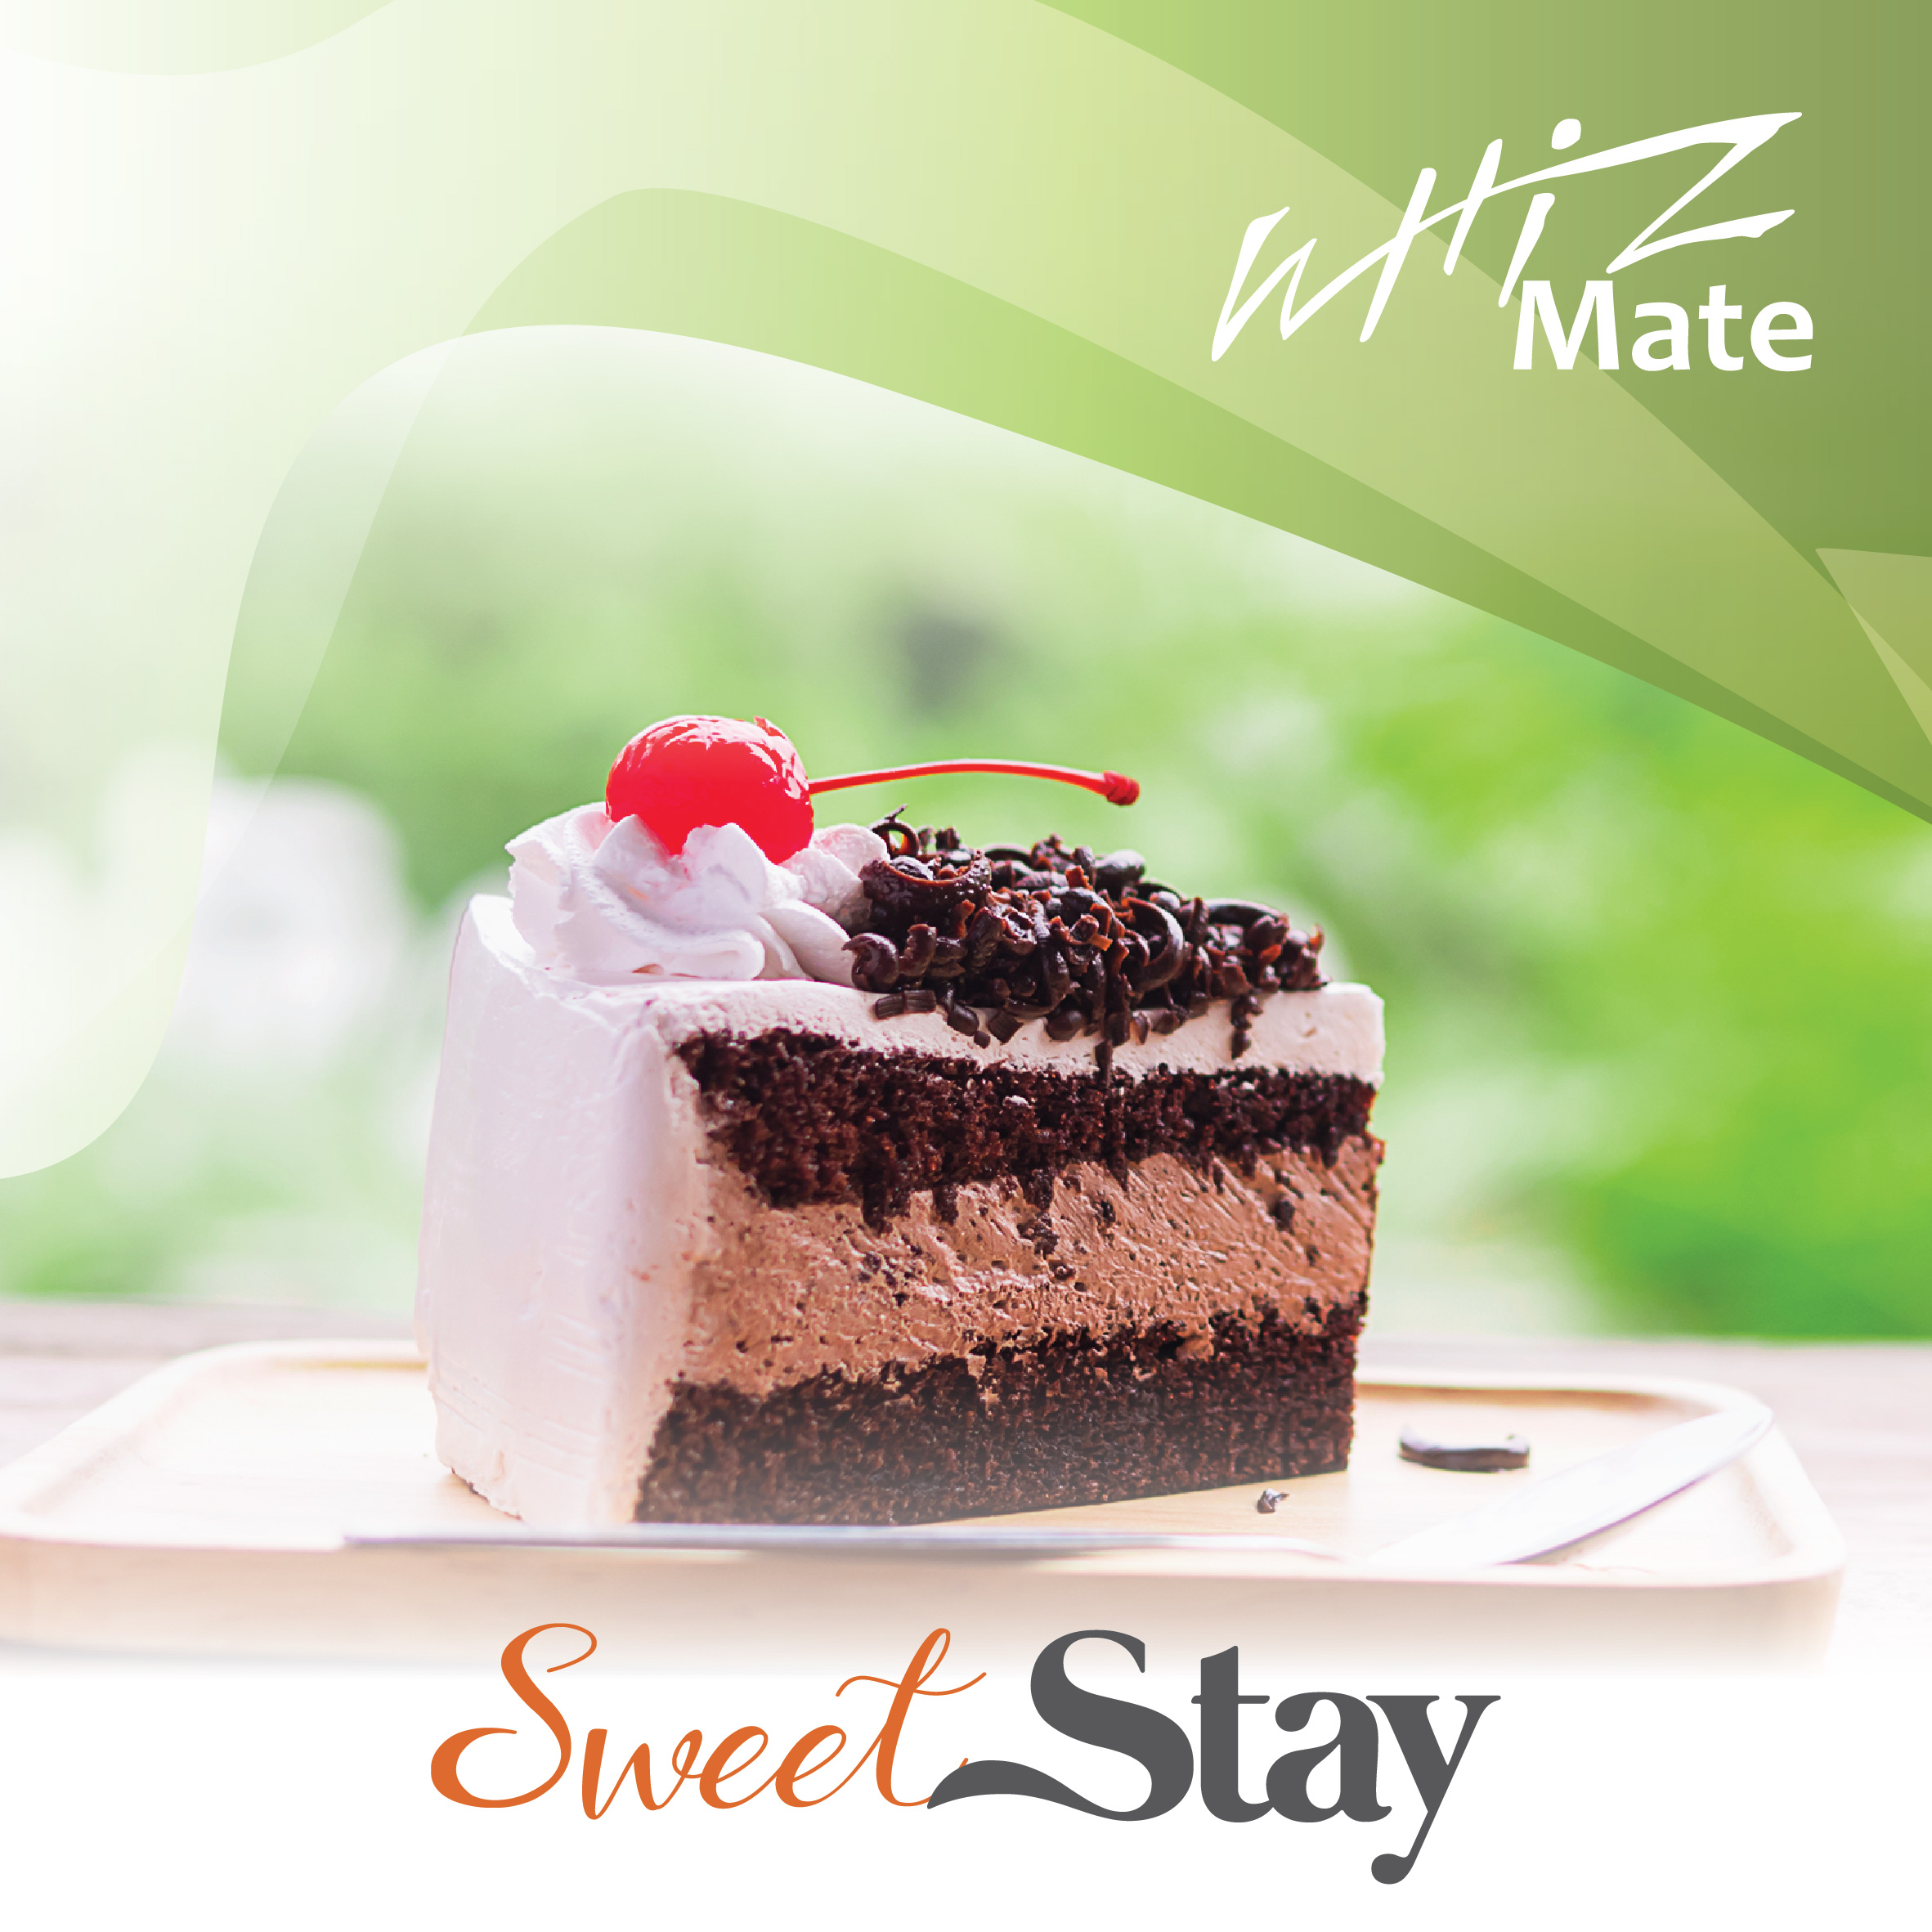 Whiz Mate Sweet Stay